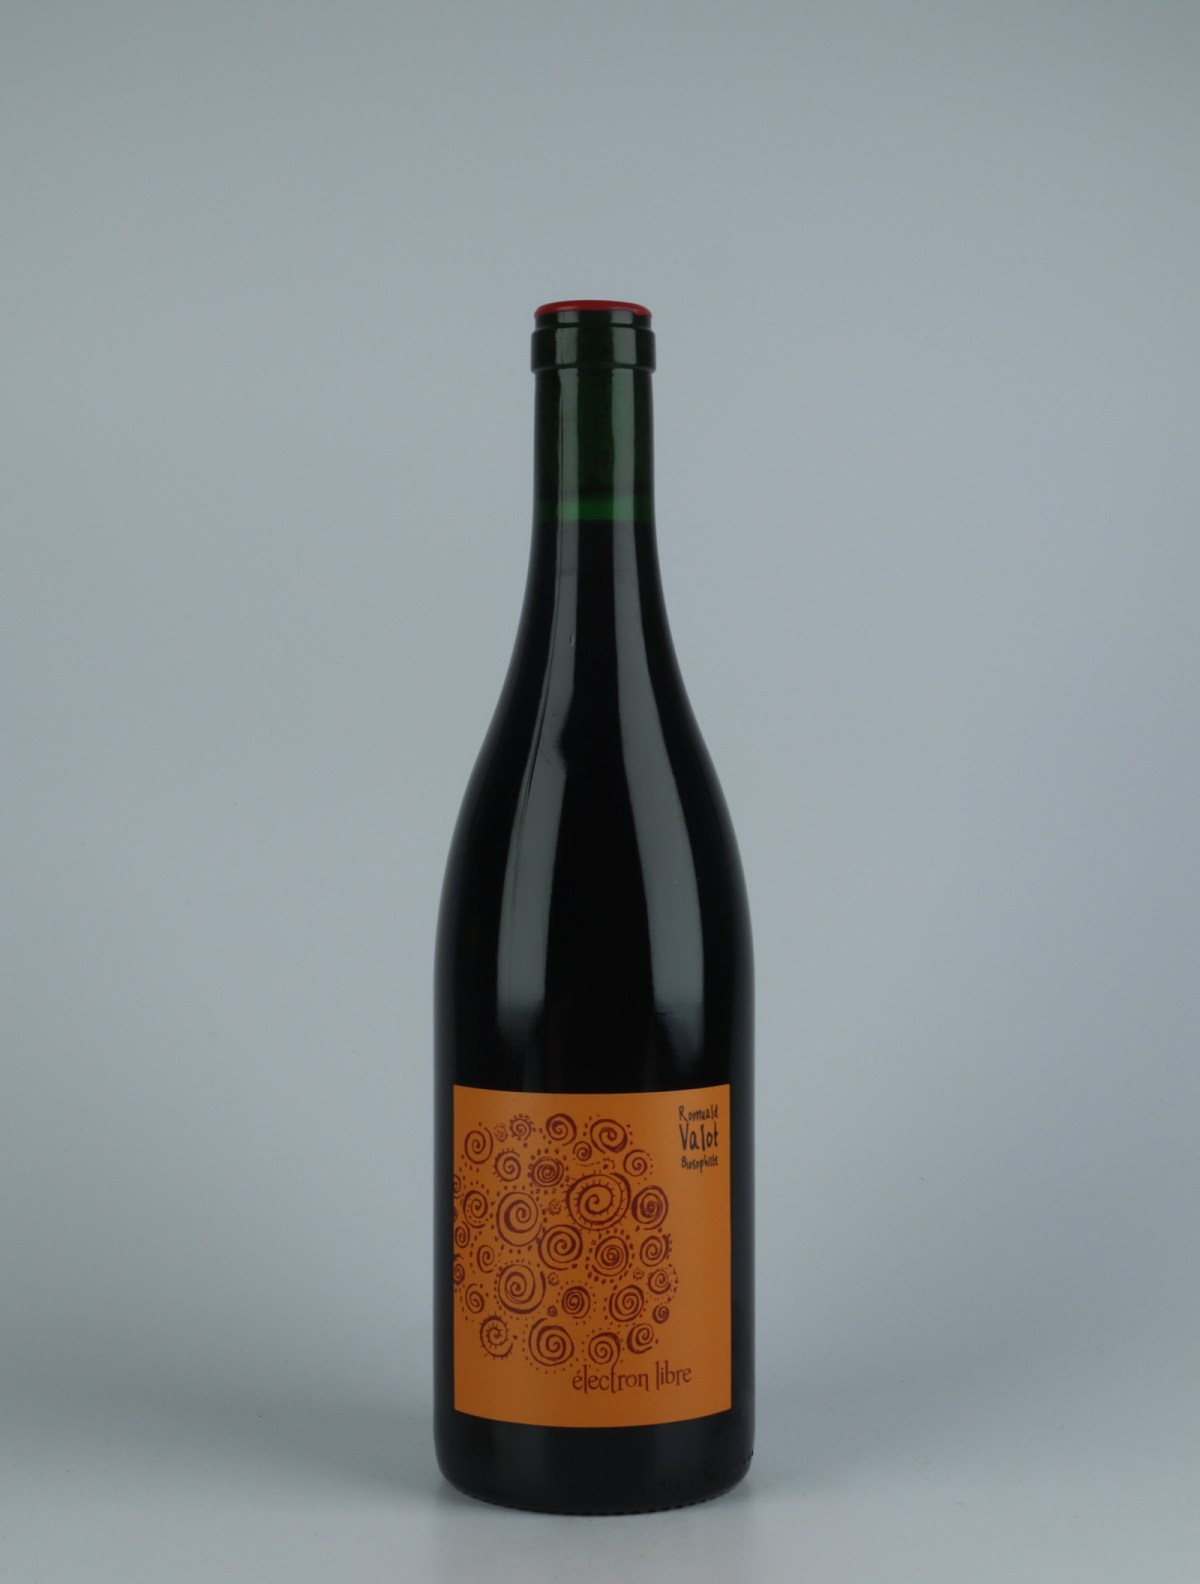 A bottle 2020 Beaujolais Villages - Electron Libre Red wine from Romuald Valot, Beaujolais in France